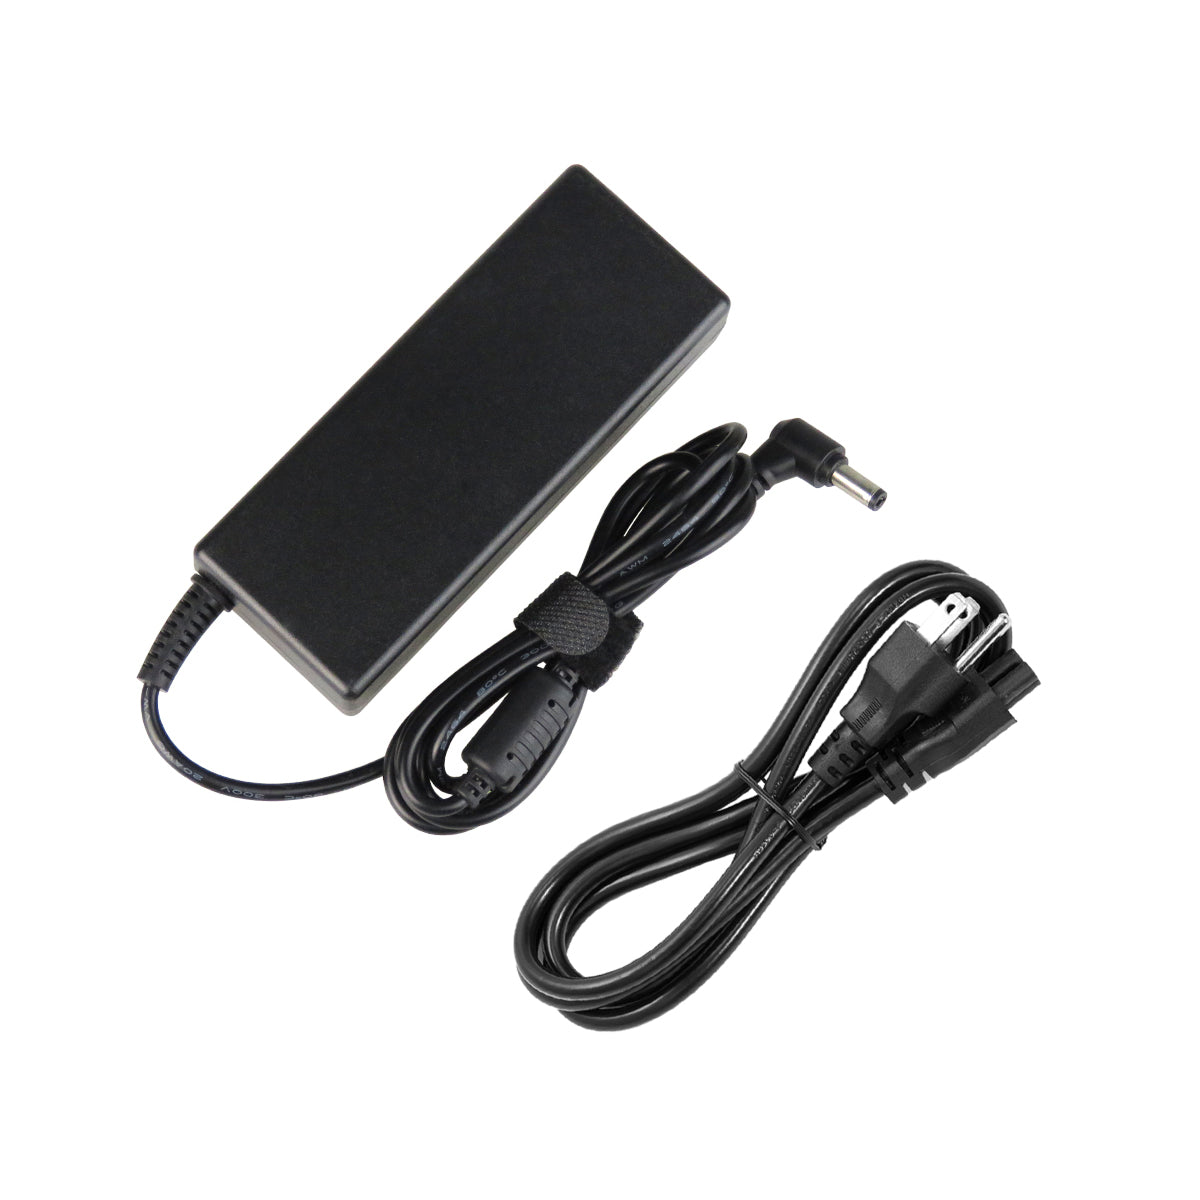 AC Adapter Charger for ASUS X54C-BBK11 Notebook.